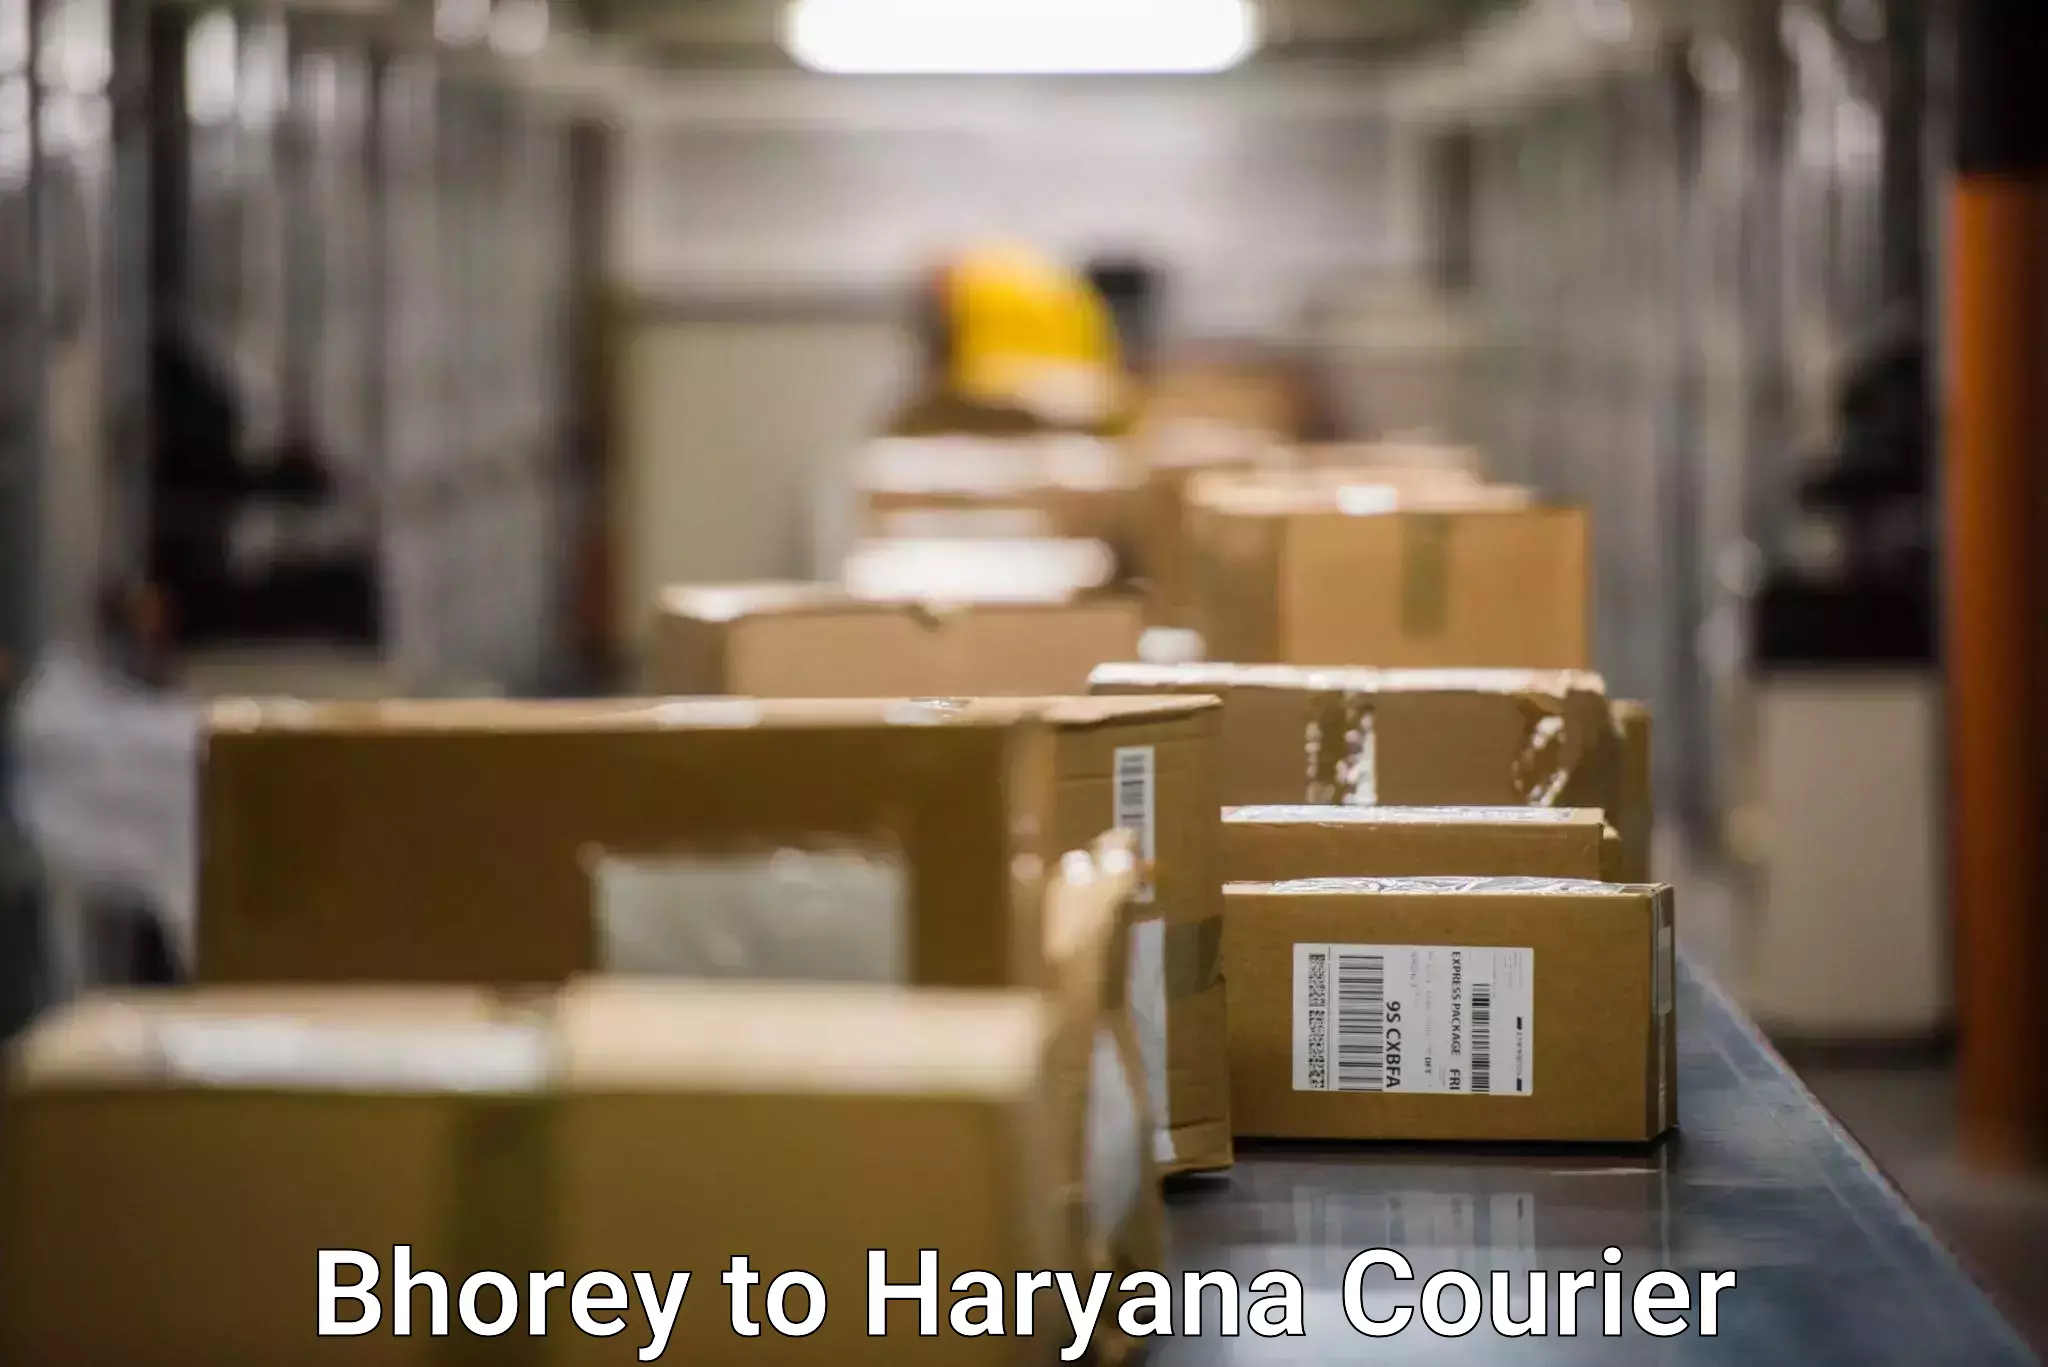 Courier service booking Bhorey to Assandh